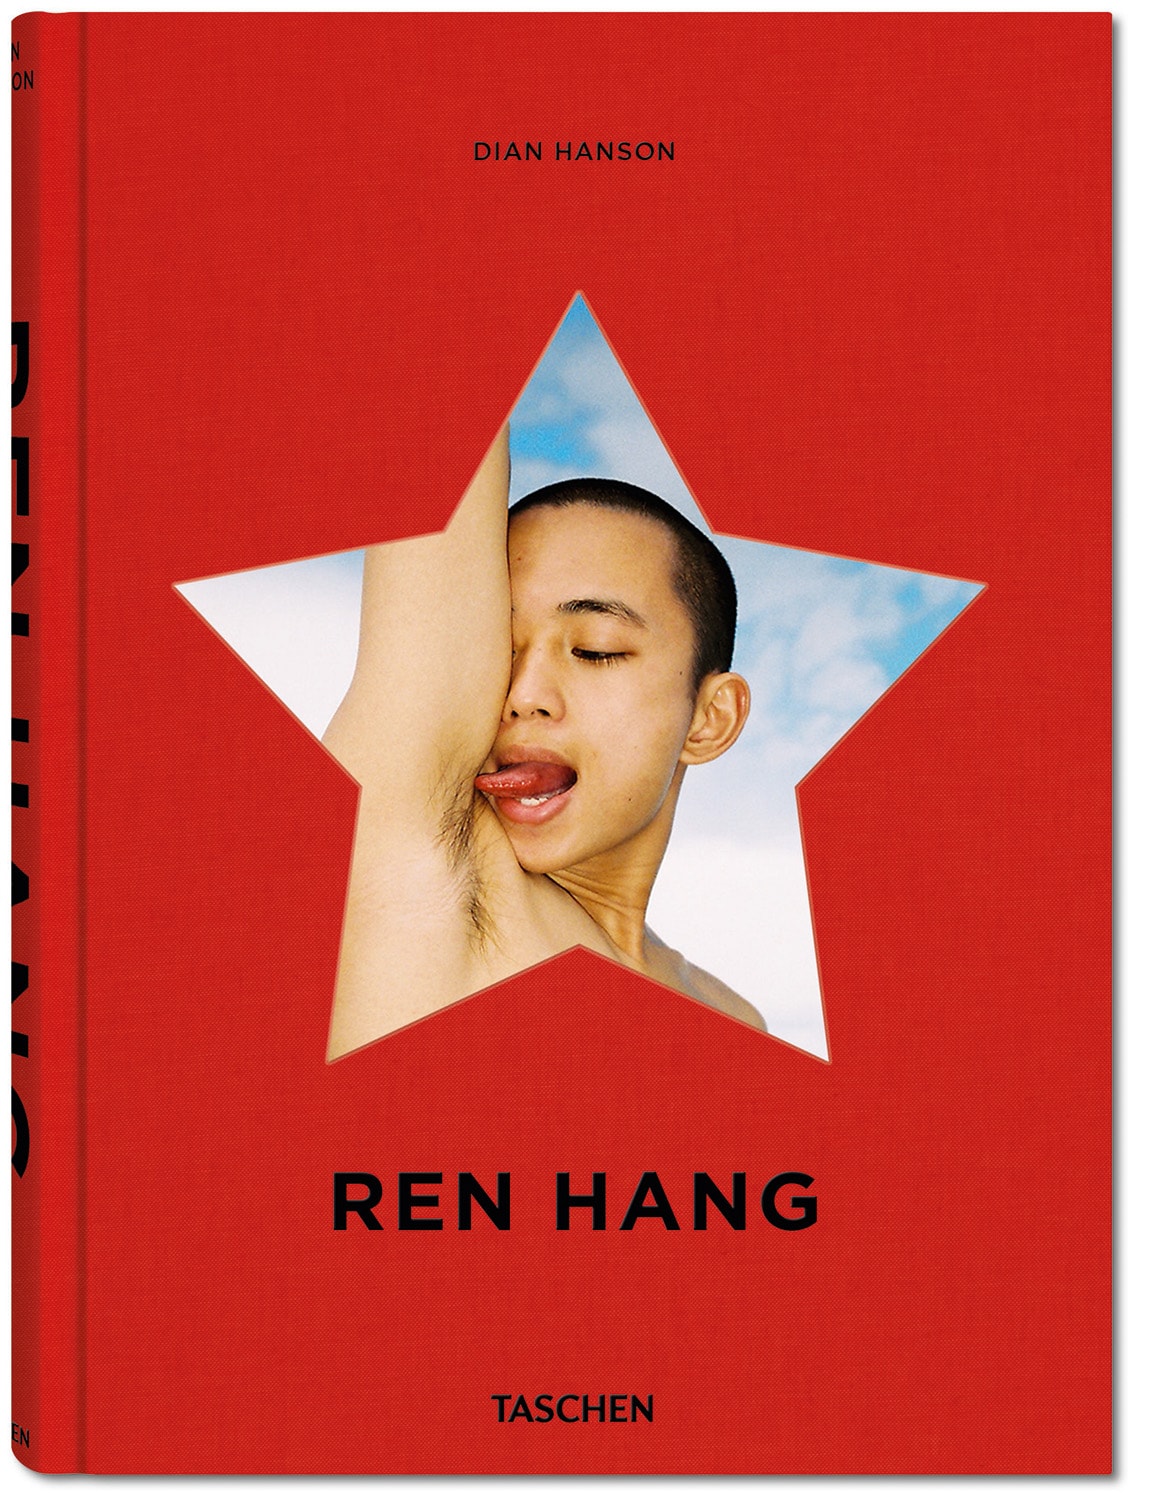 Late Ren Hang’s new book, REN HANG is published by TASCHEN<br>January 2017